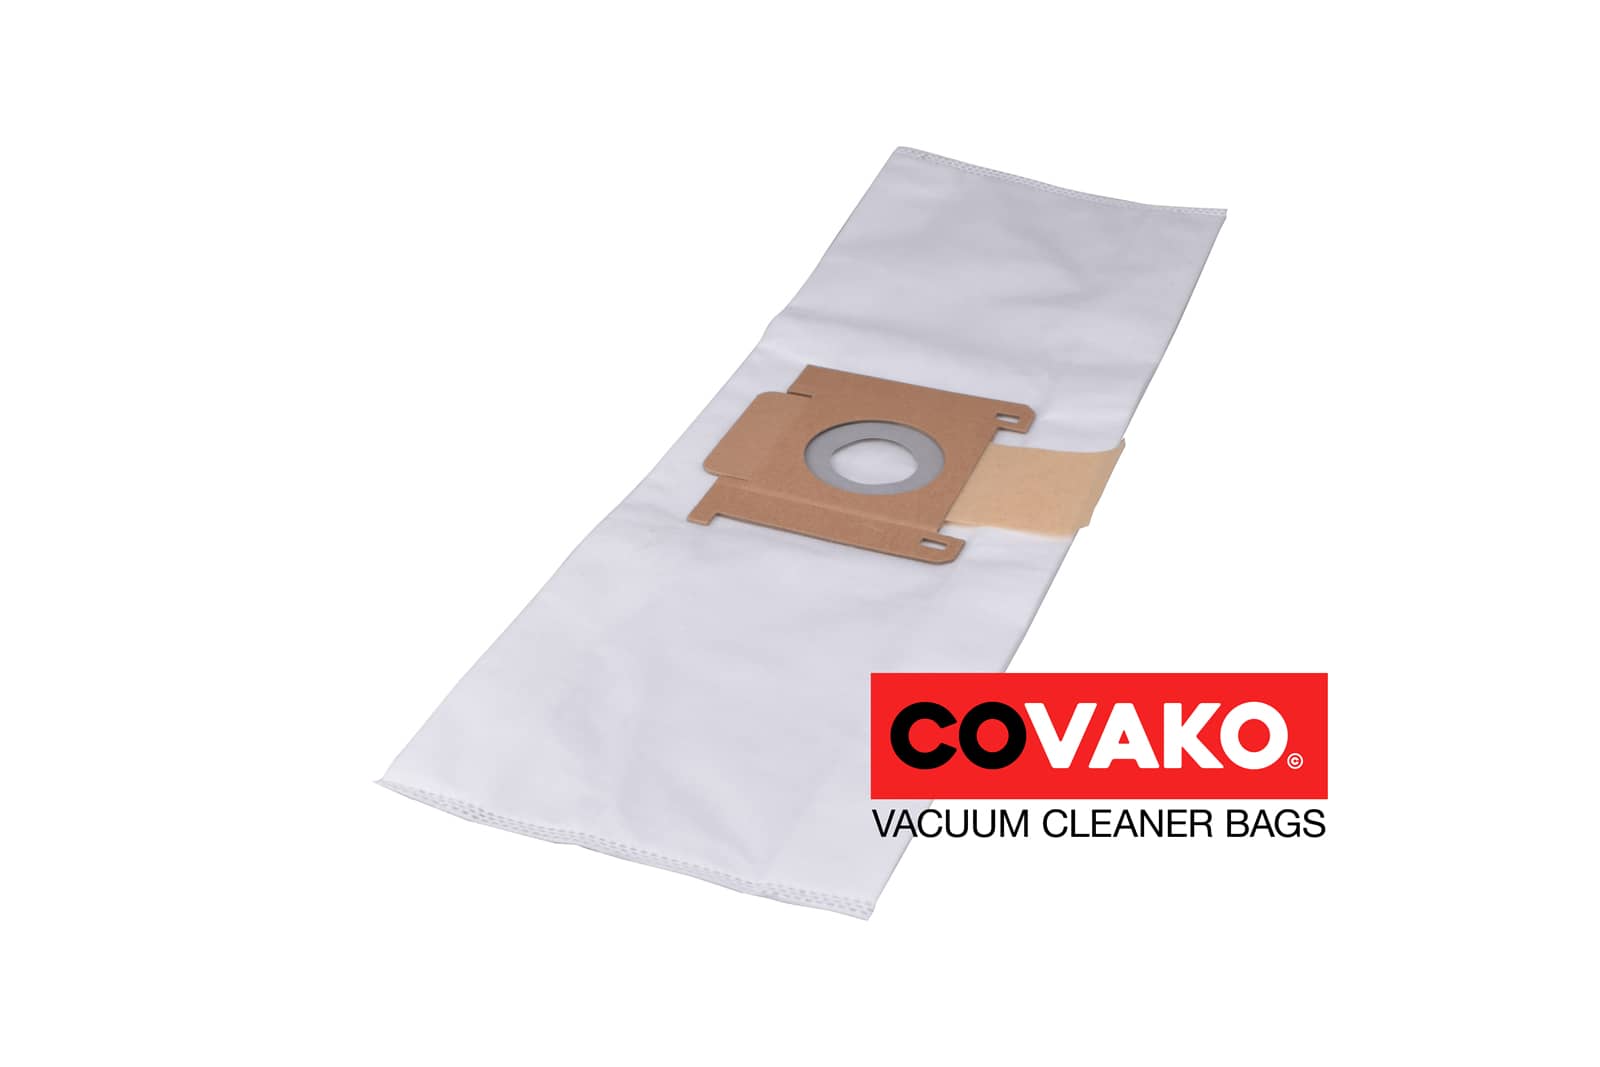 Fast Steady Extra 6.0 / Synthesis - Fast vacuum cleaner bags